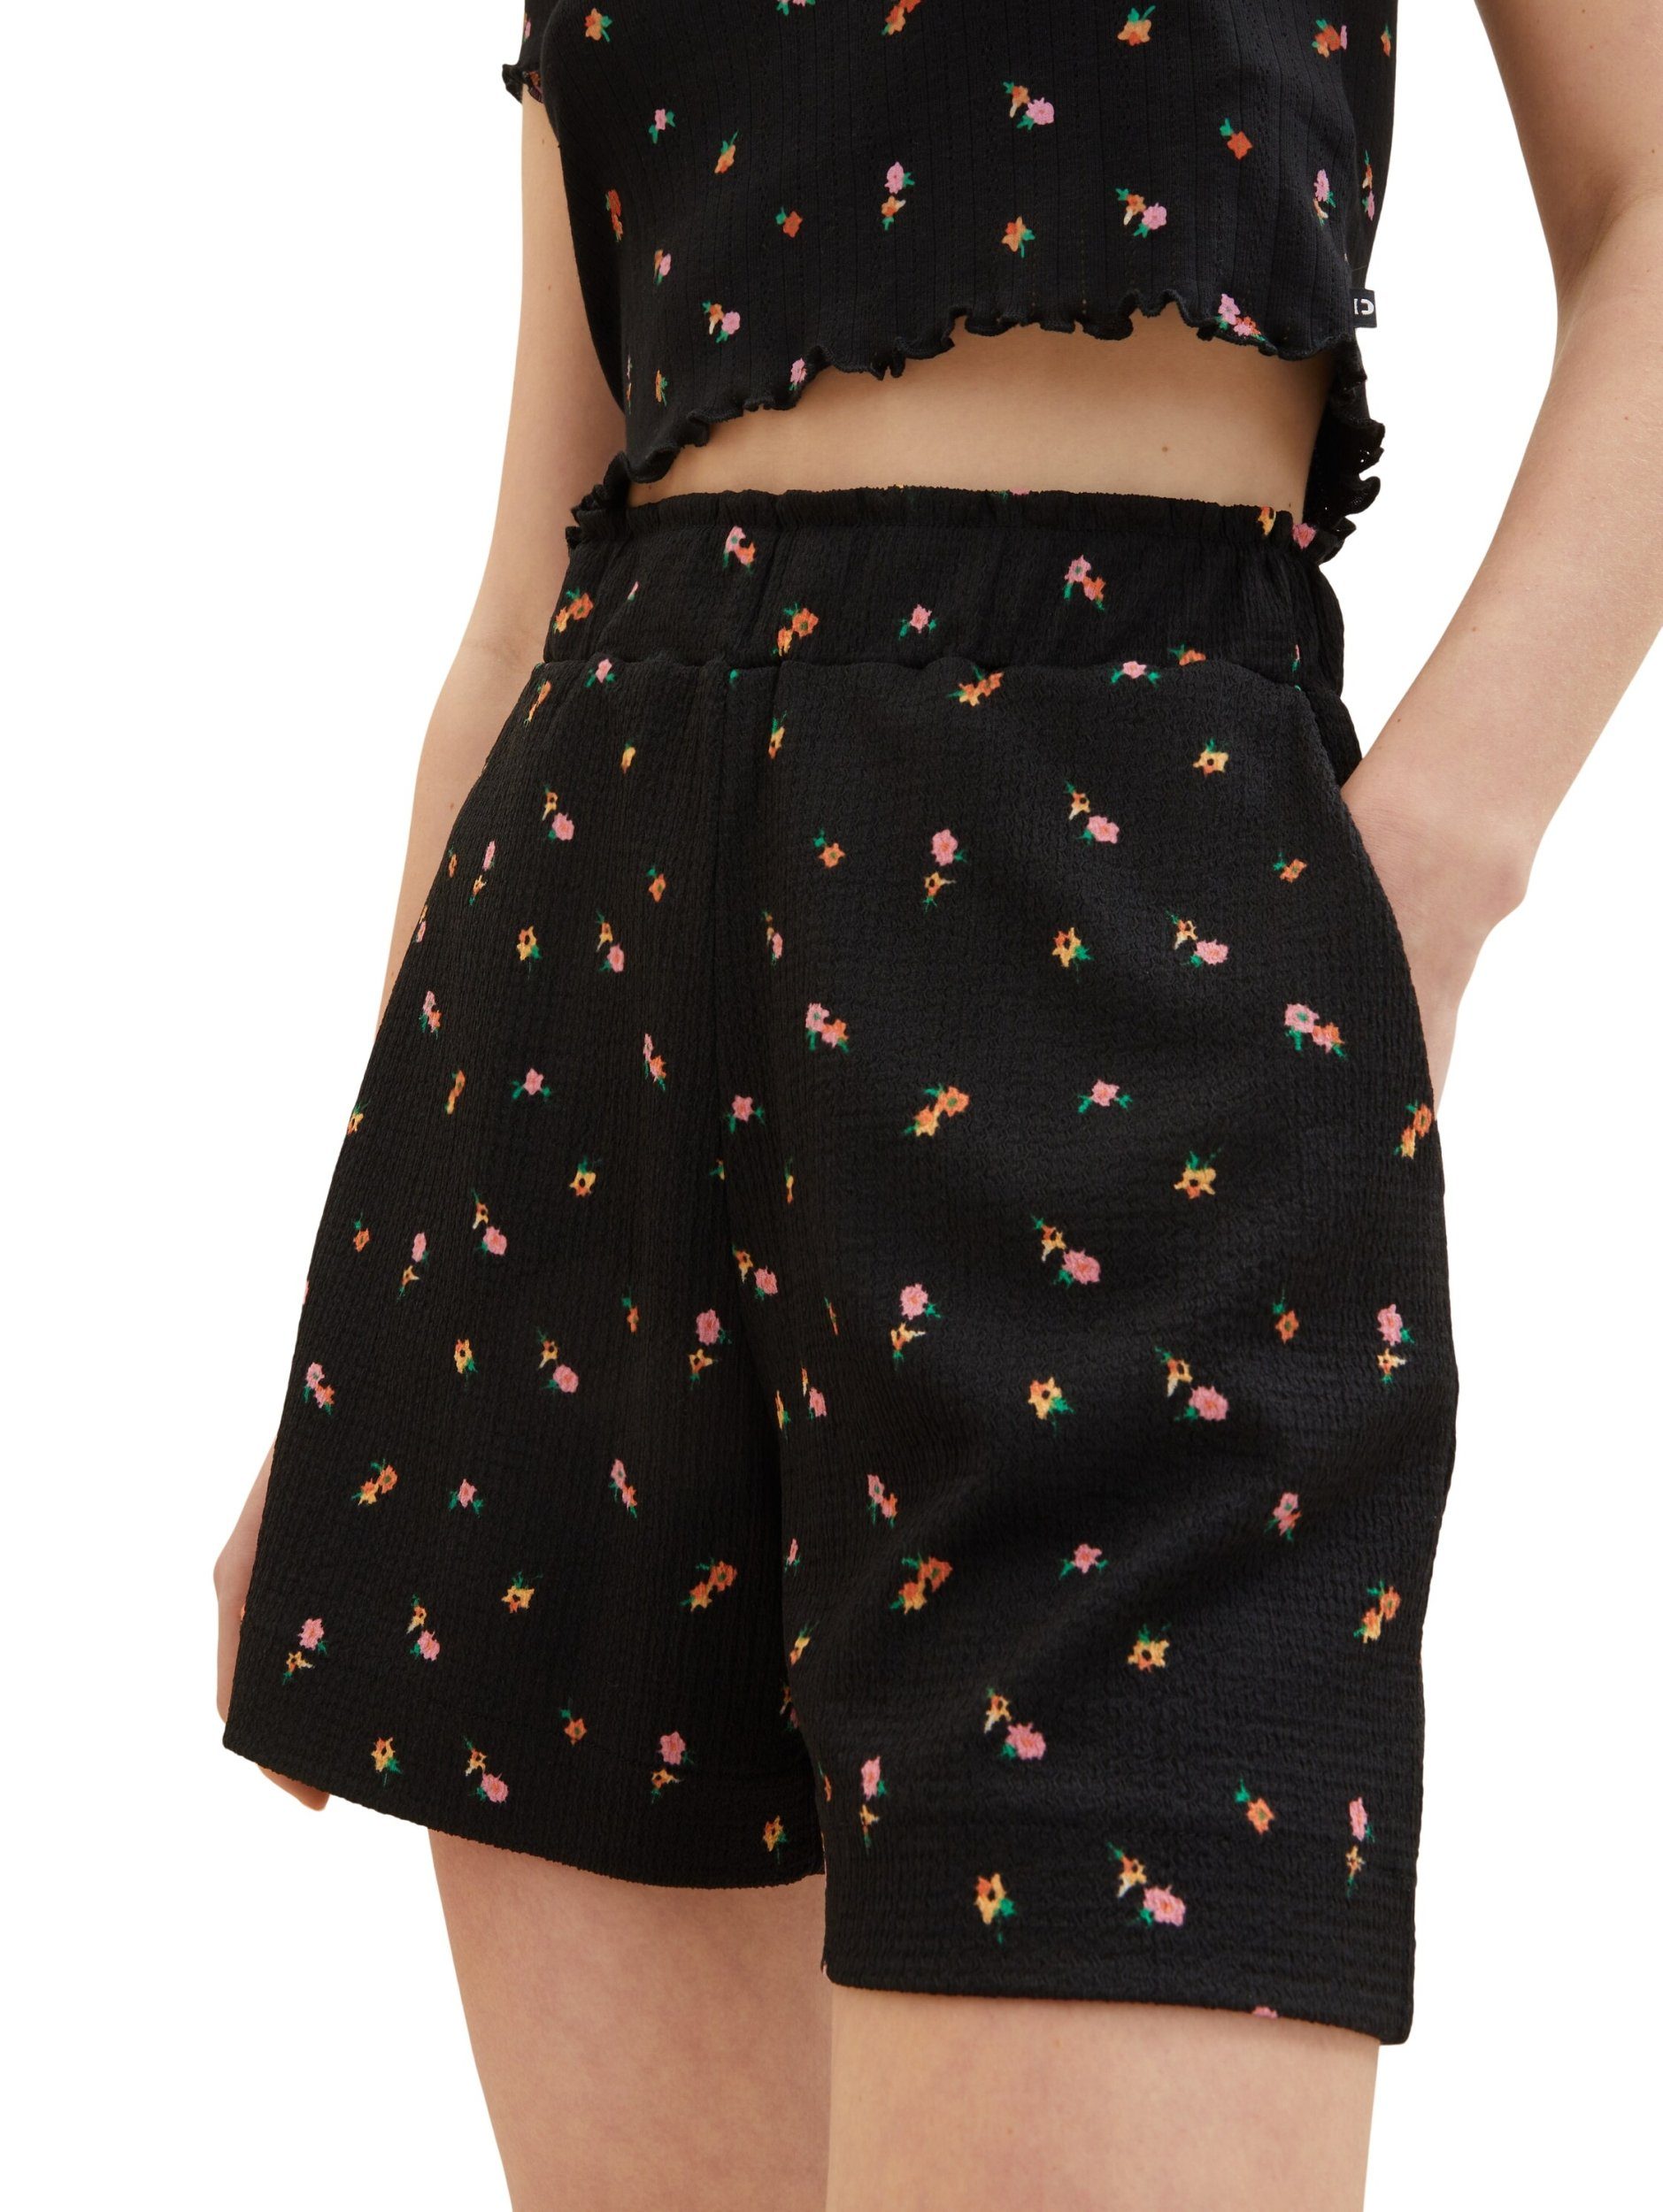 TAILOR Shorts black 31950 print shorts flower small TOM Easy structured